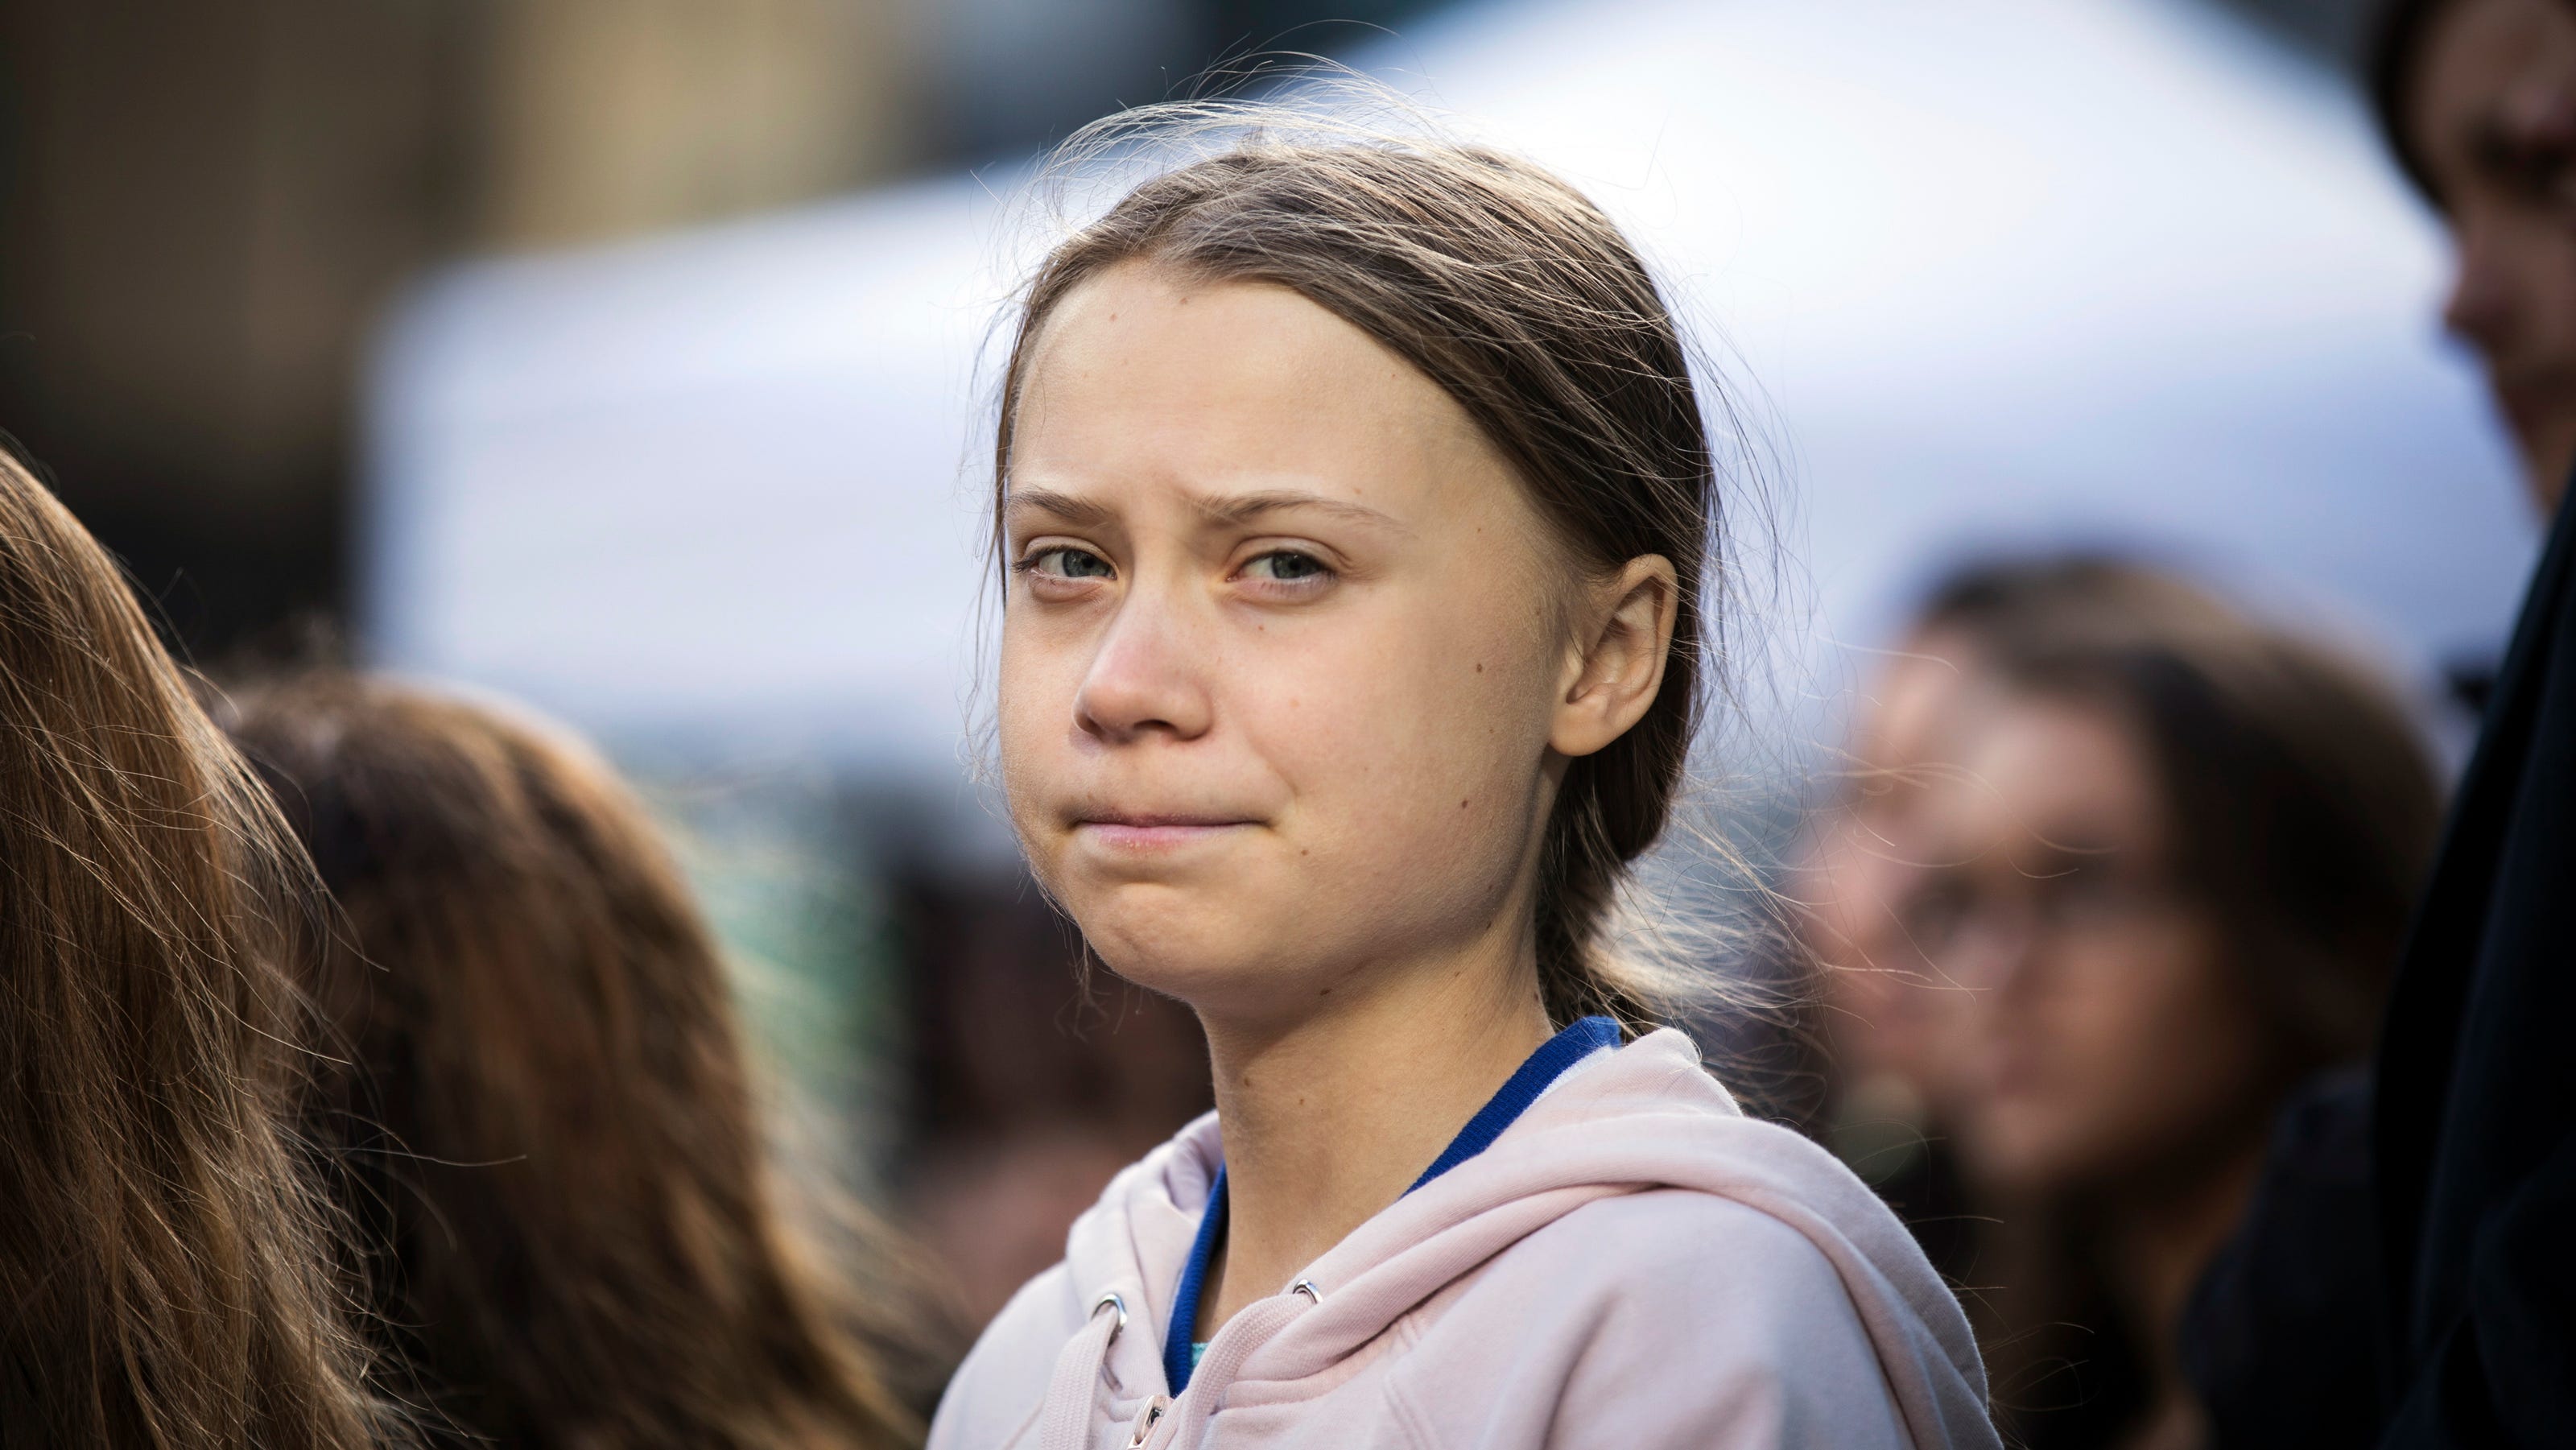 Pearl Jam, Greta Thunberg paint grim picture of environment's future in 'Retrograde' video - USA TODAY